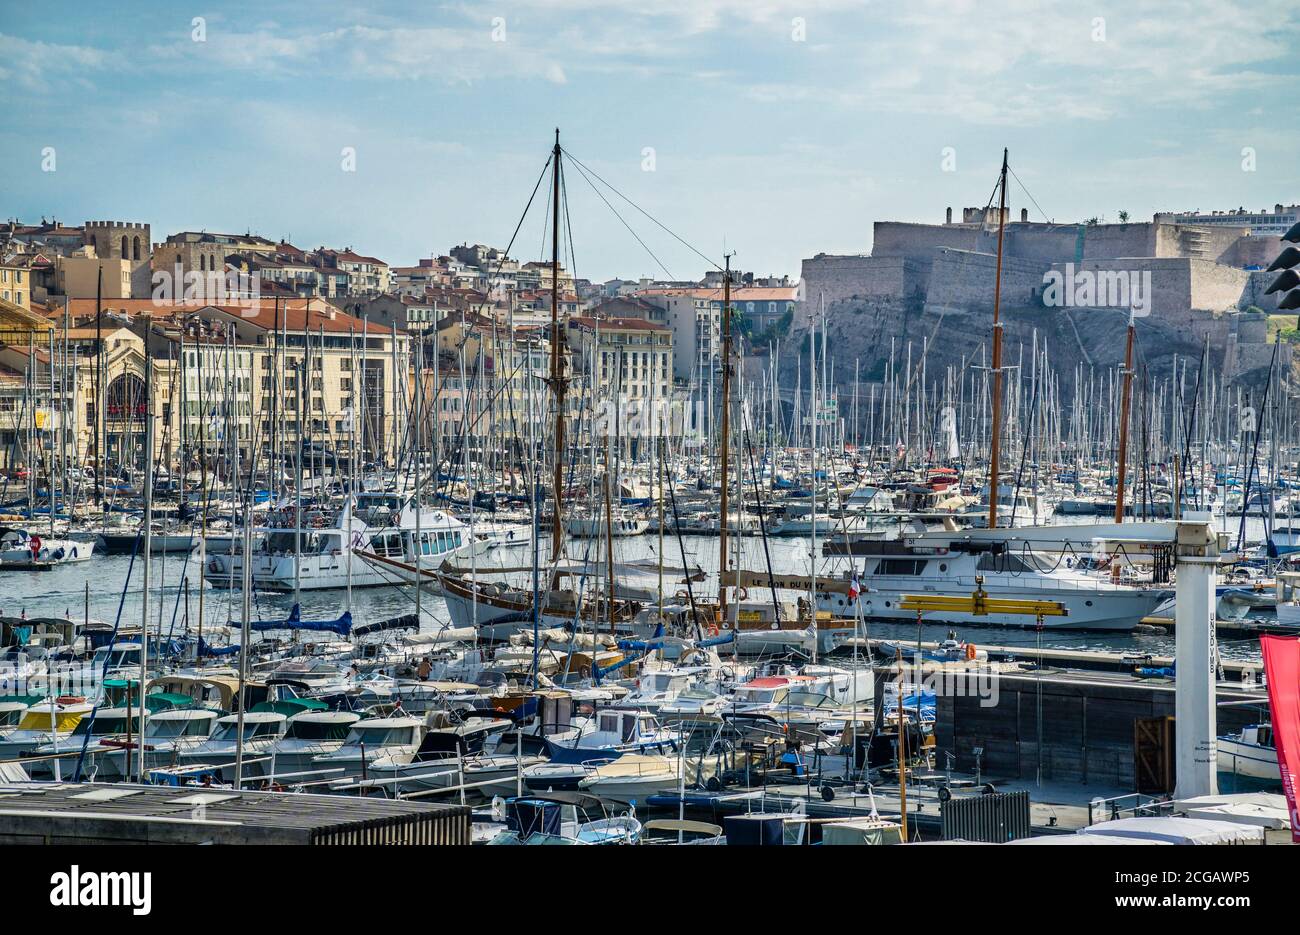 Vieux Port, the Old Port of Marseille with view of 17th century Fort Saint-Nicolas, Bouches-du-Rhône department, southern France Stock Photo